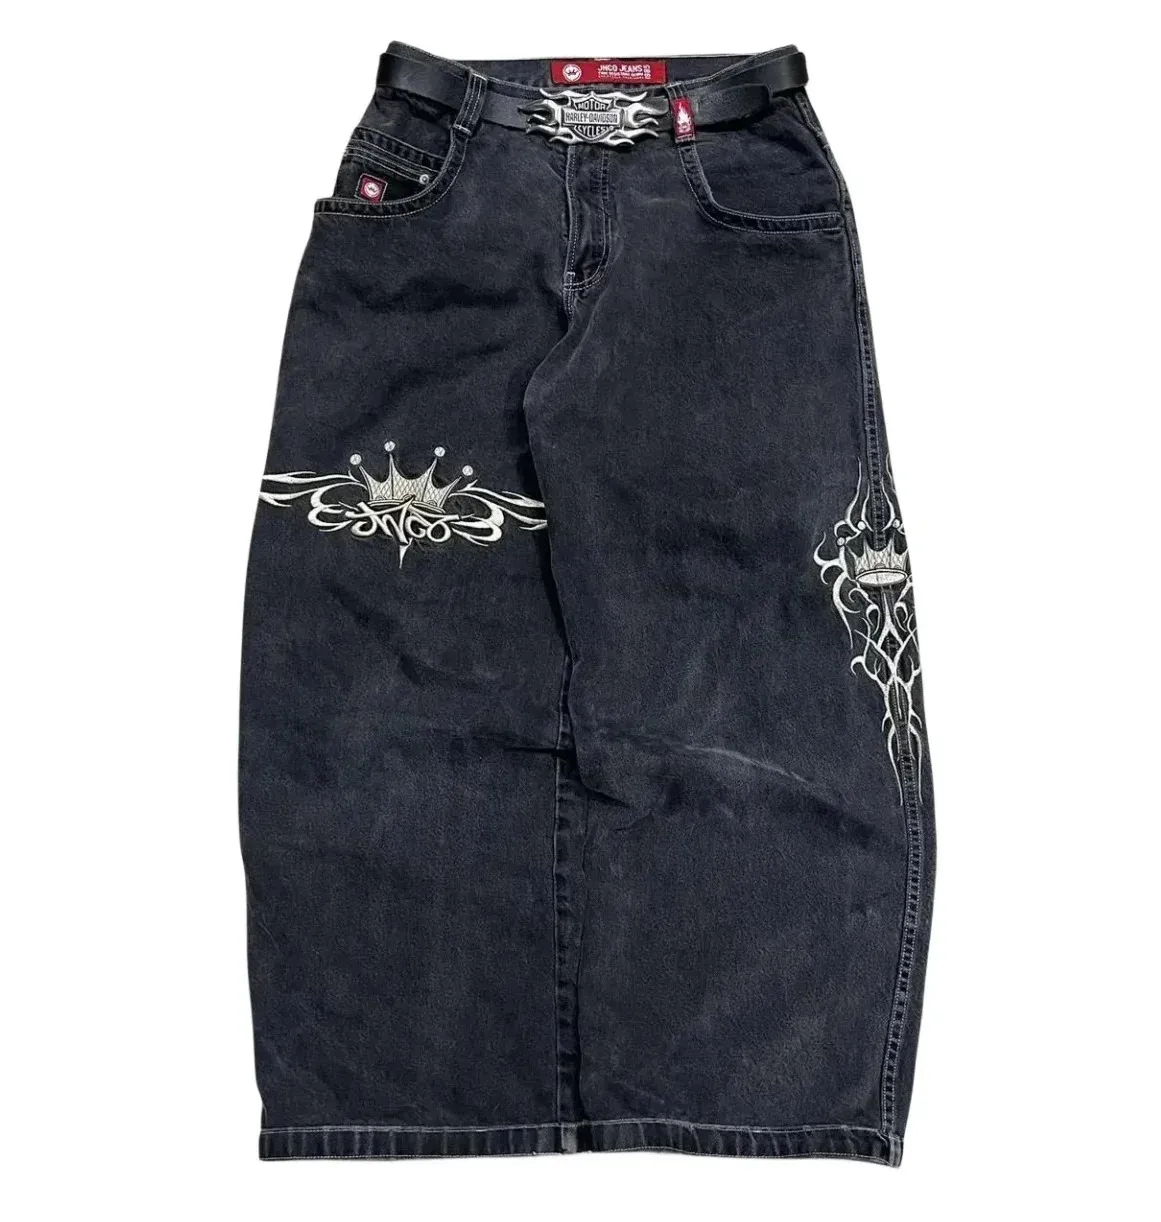 JNCO Jeans Mens Harajuku Retro Hip Hop Skull Embroidery Baggy Jeans Denim Pants 90s Street Gothic Wide Trousers Streetwear 240122